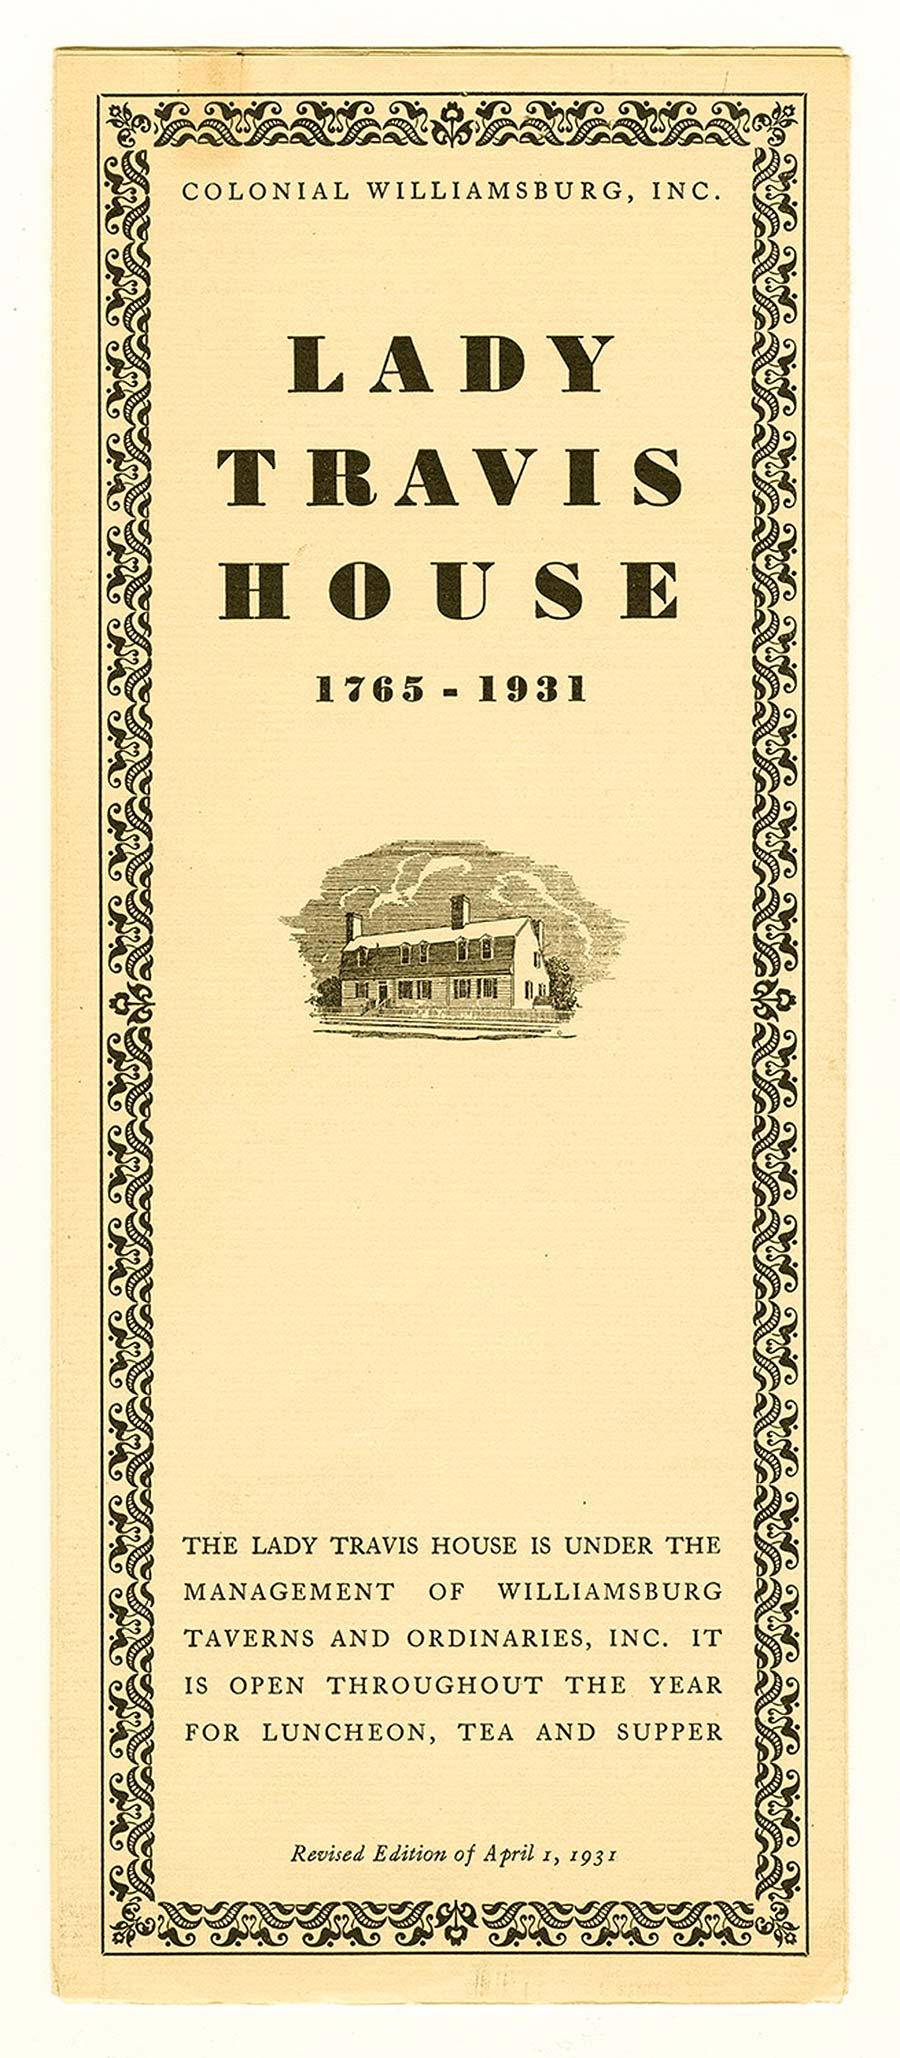  Brochure for Lady Travis House, April 1, 1931.